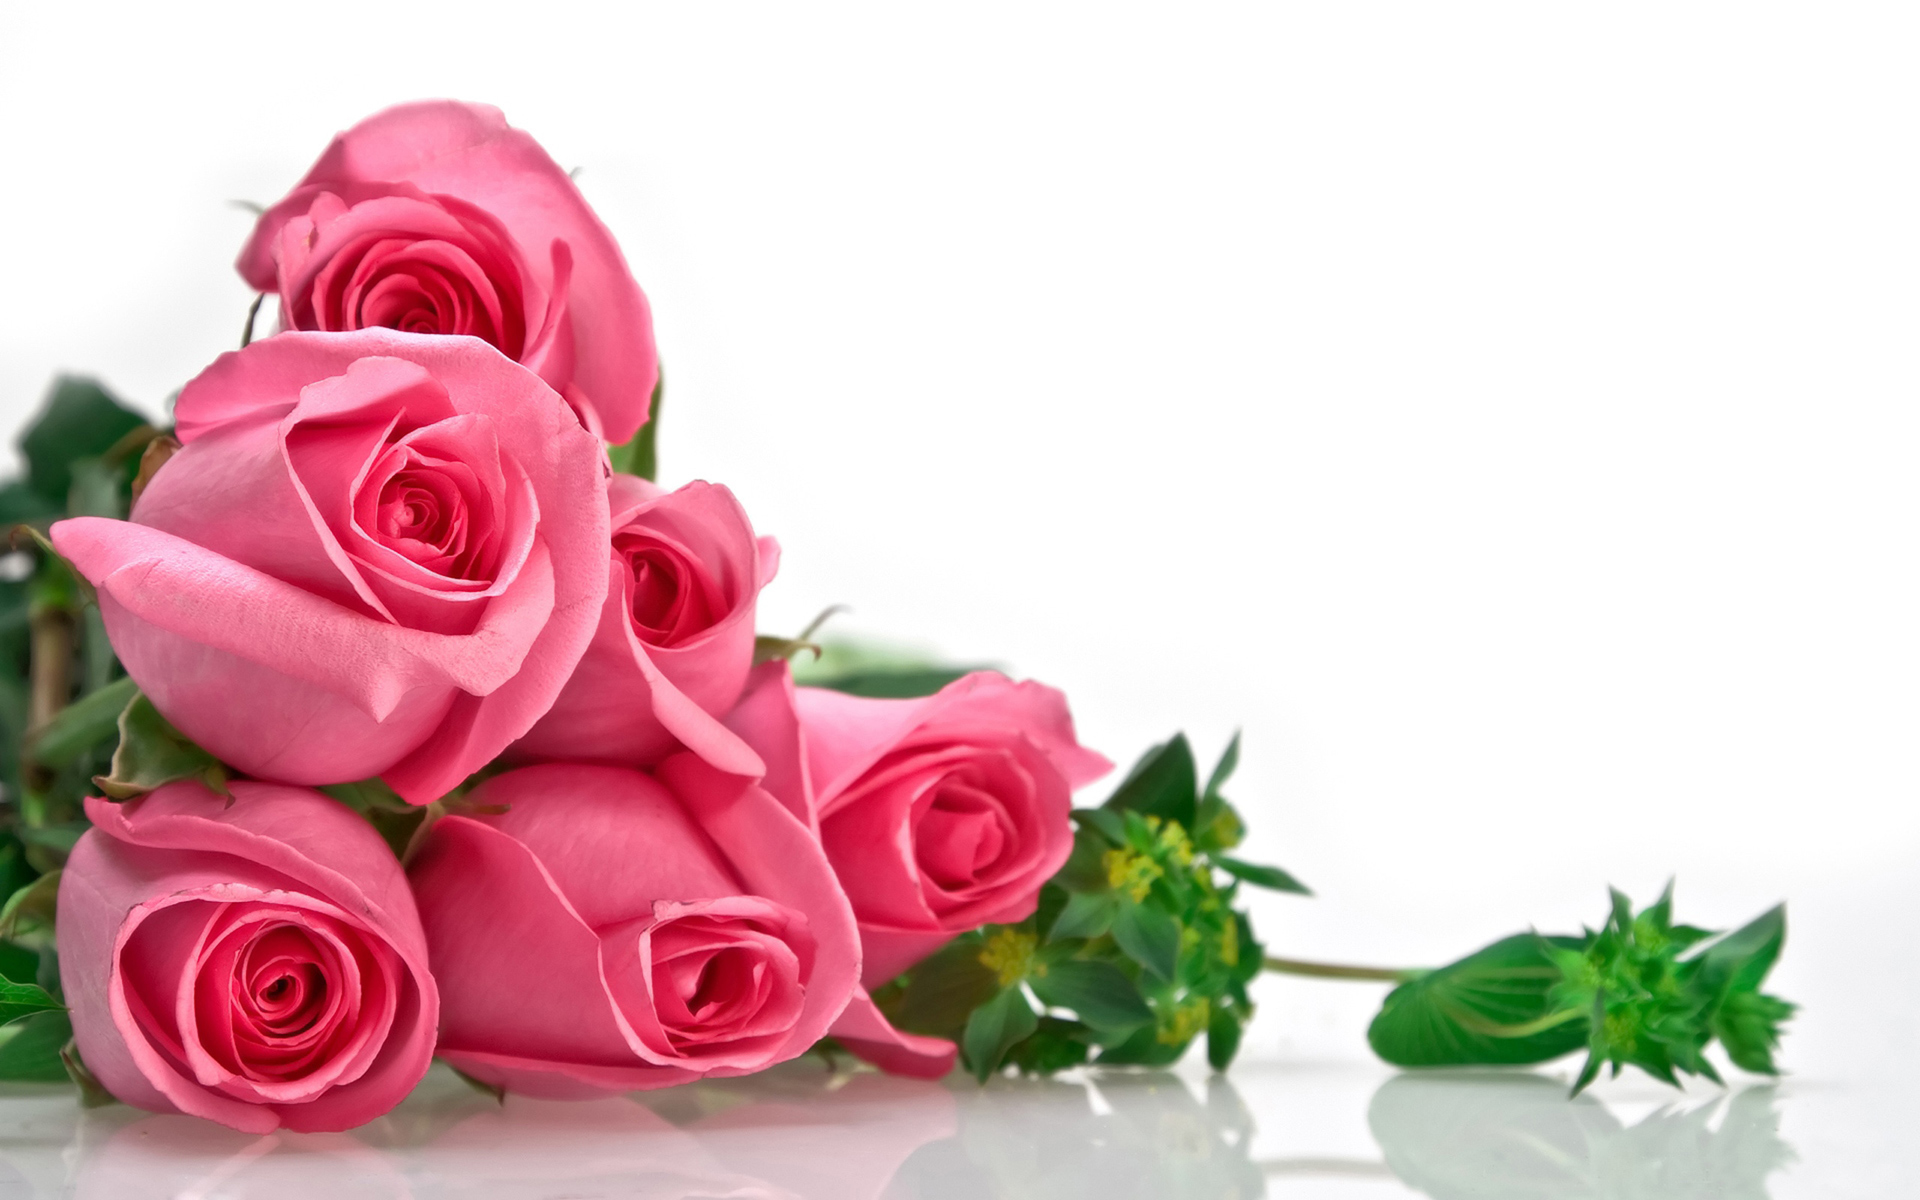 Roses Bouquet Wallpaper - HD Wallpapers Backgrounds of Your Choice